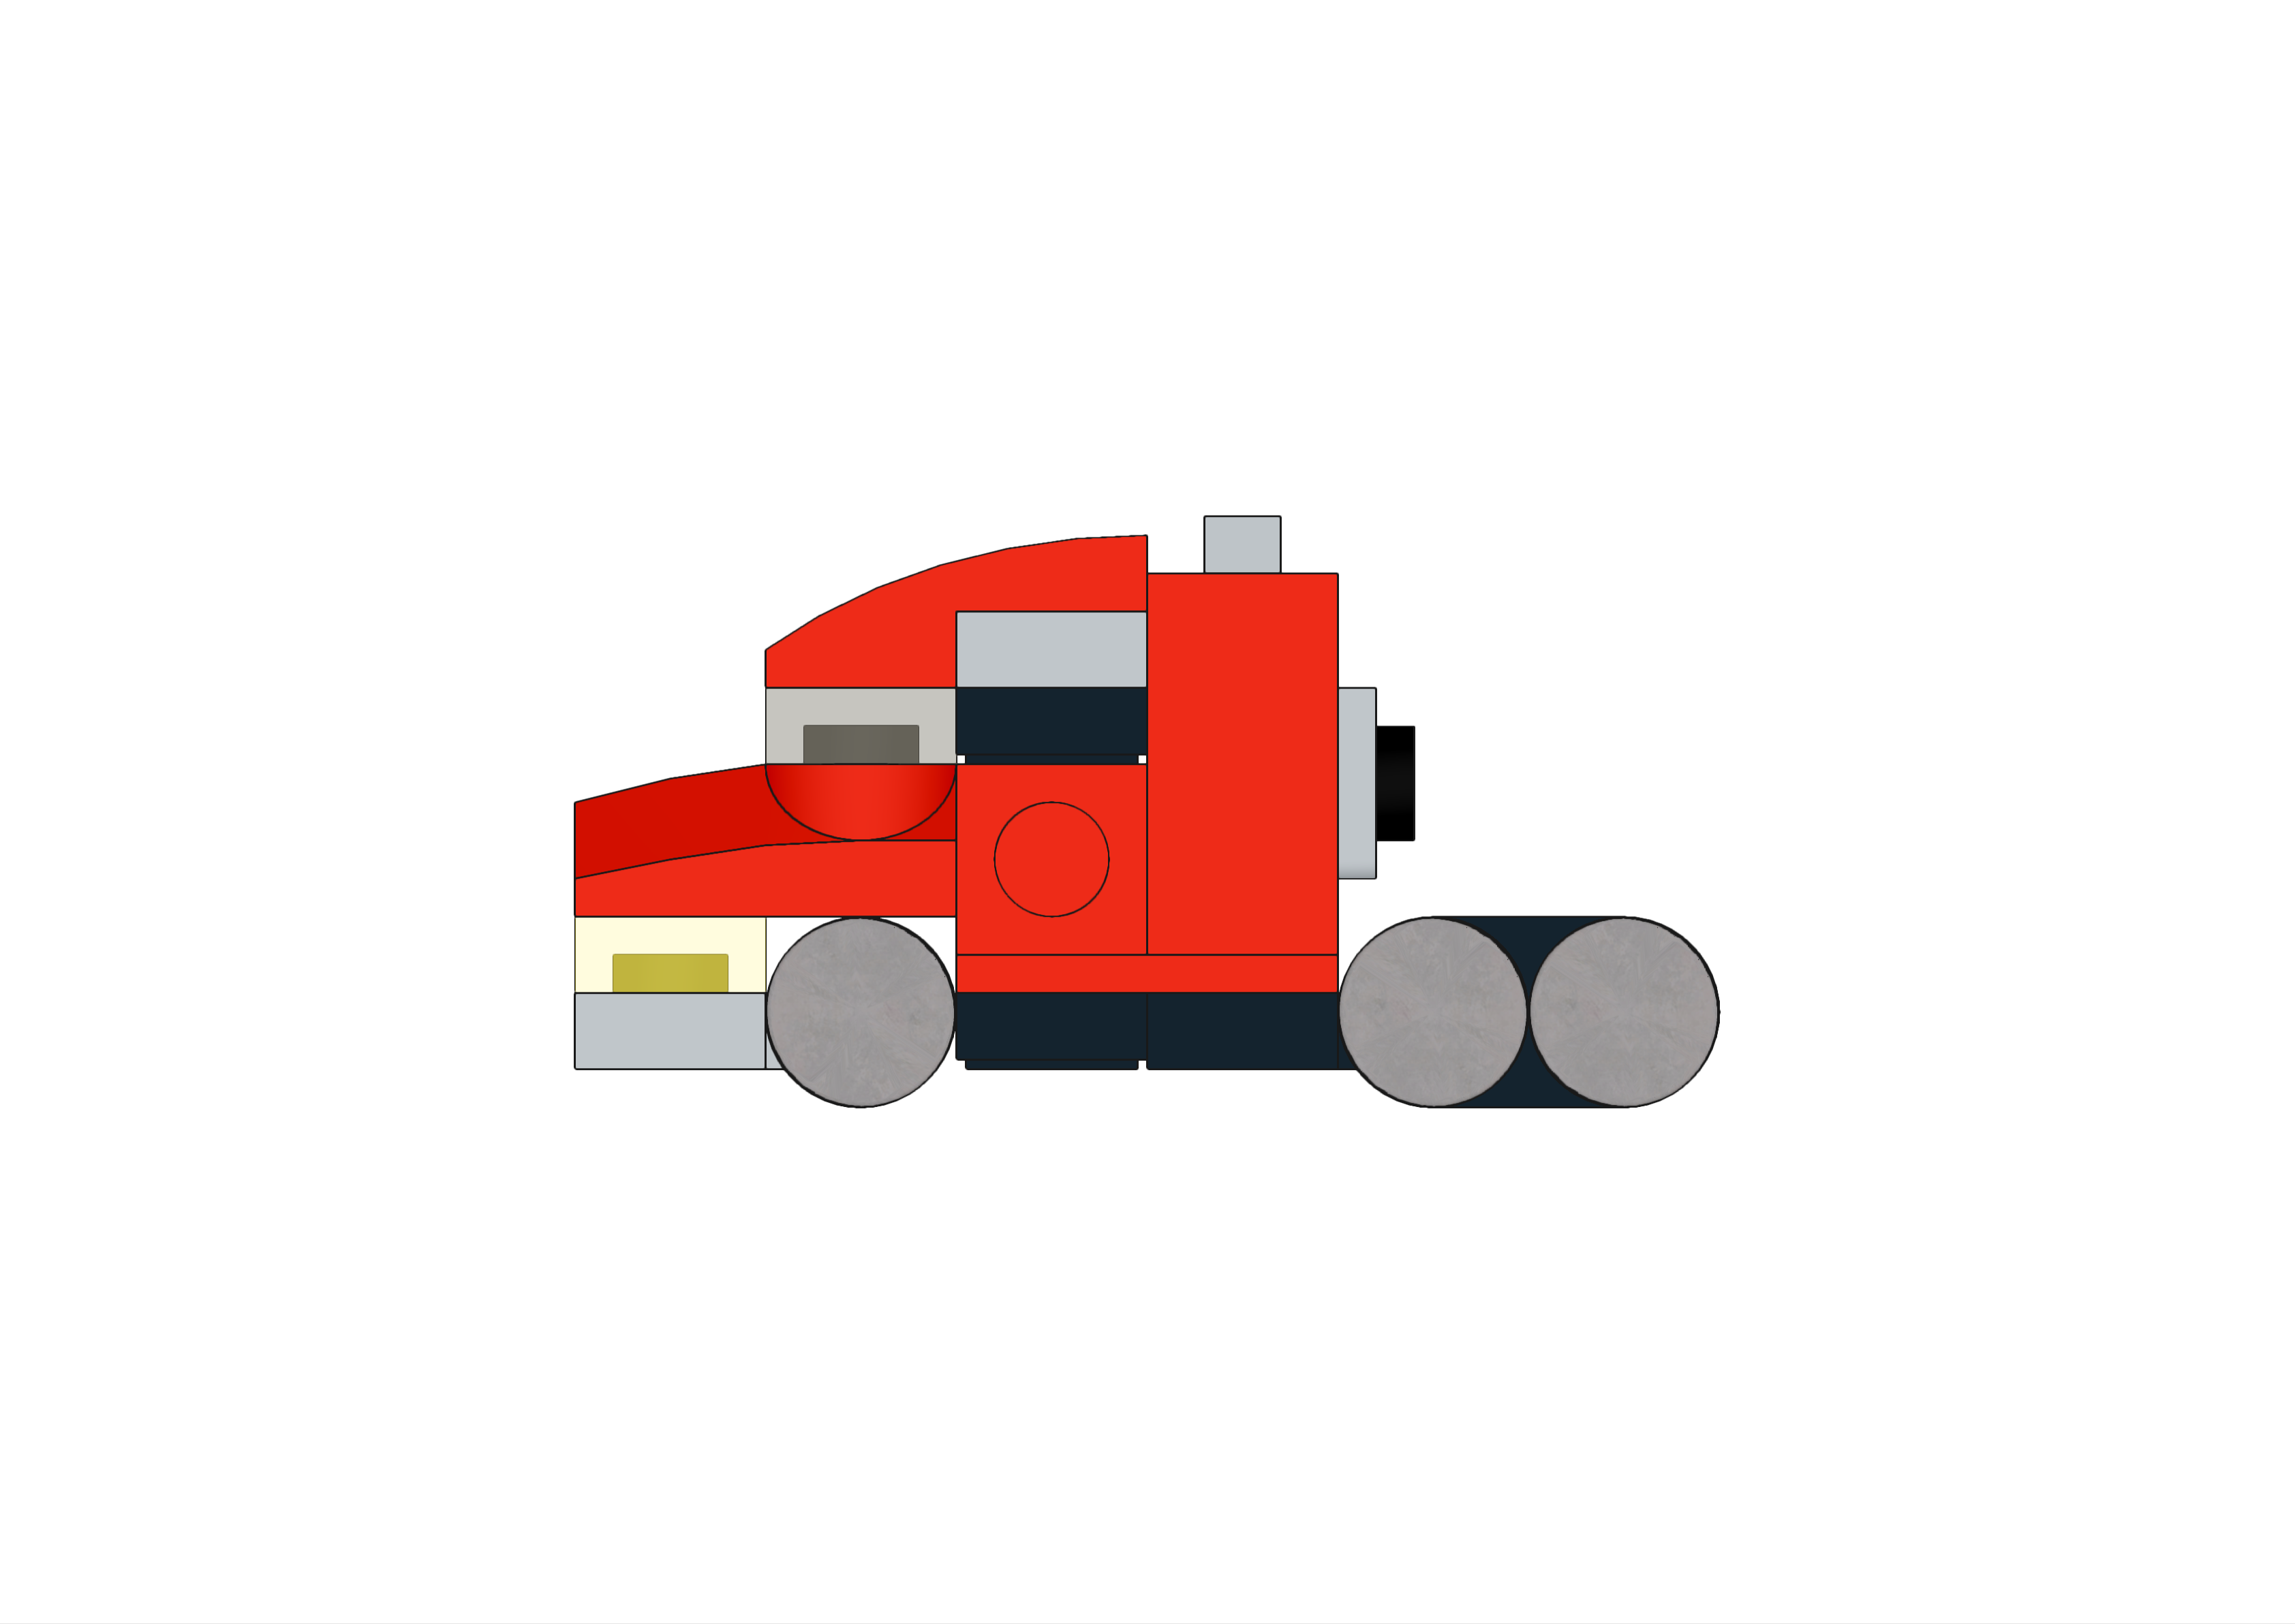 Alternate side view image of the LEGO Micro American Truck MOC.